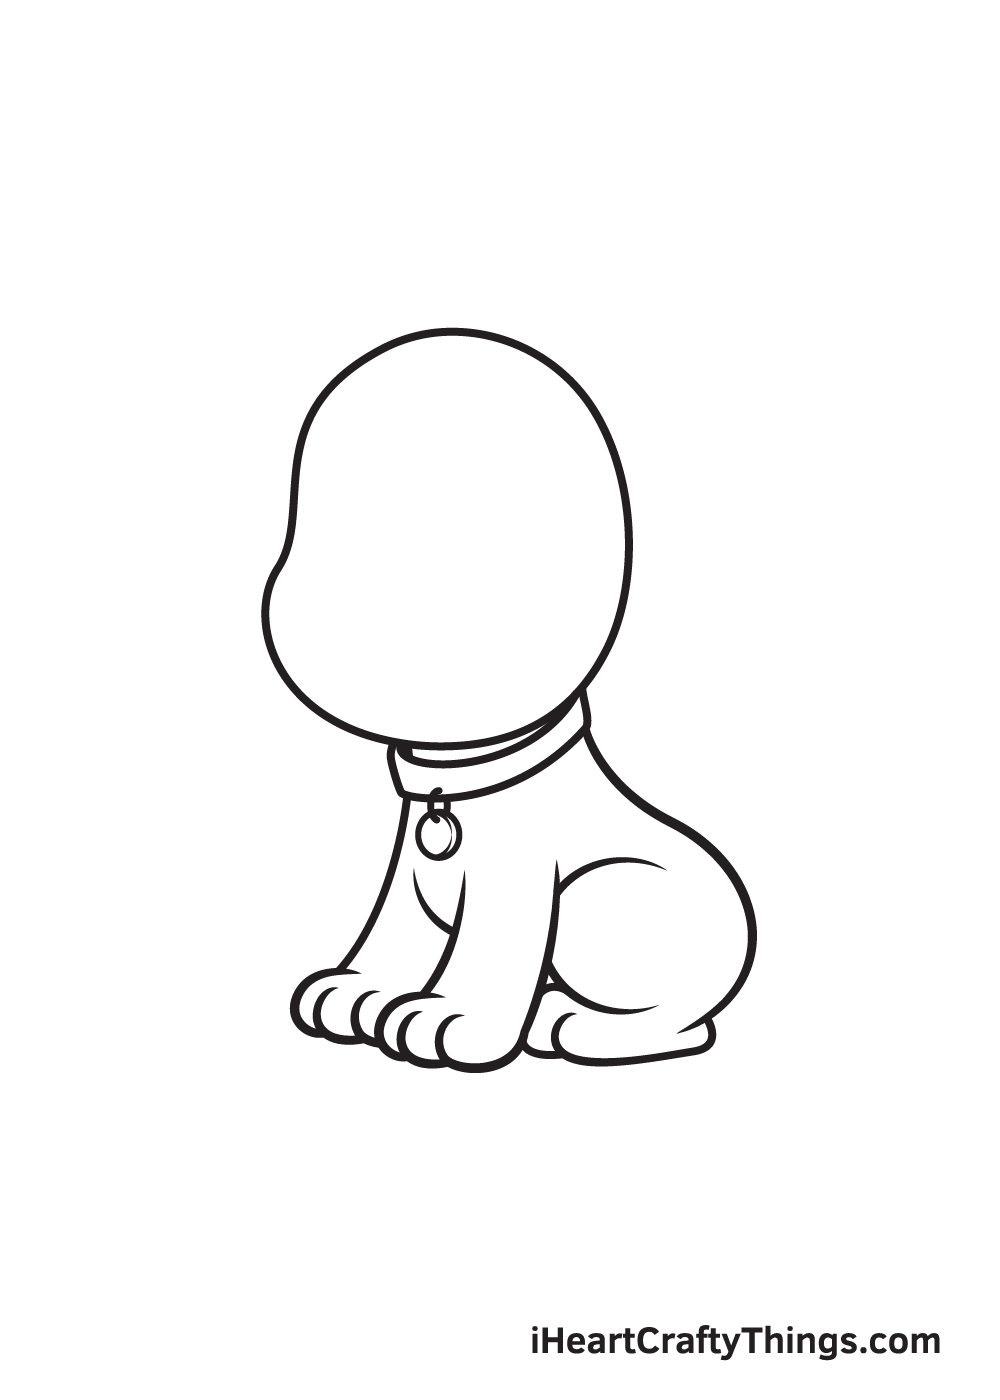 3 Ways to Draw a Cute Puppy - wikiHow